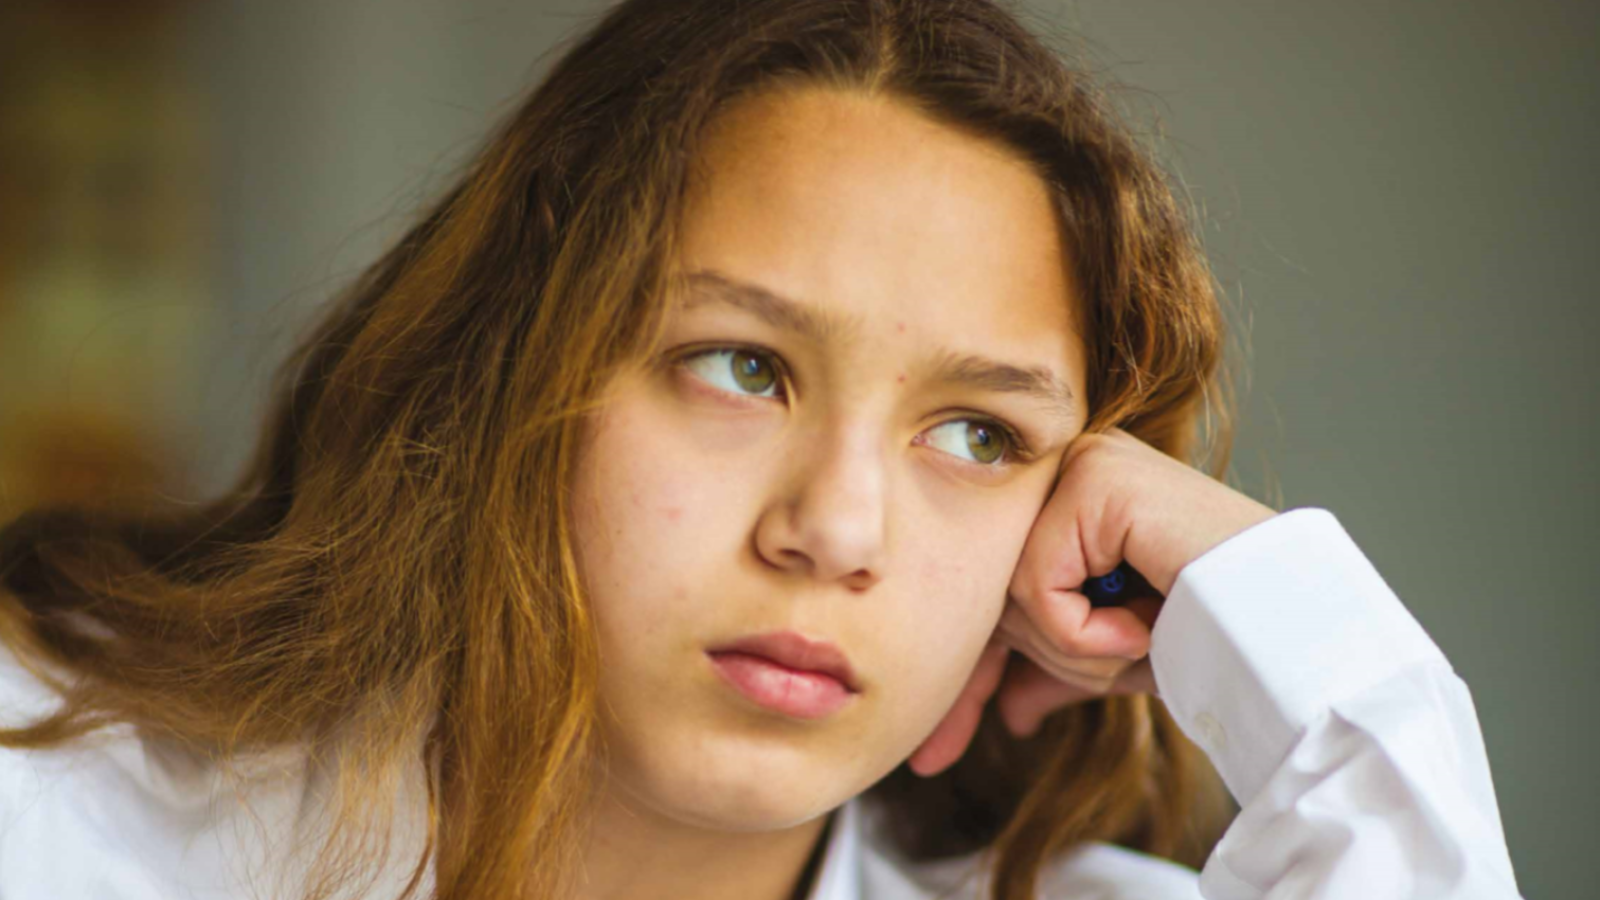 Girl in school uniform resting head on her hand while looking into the distance